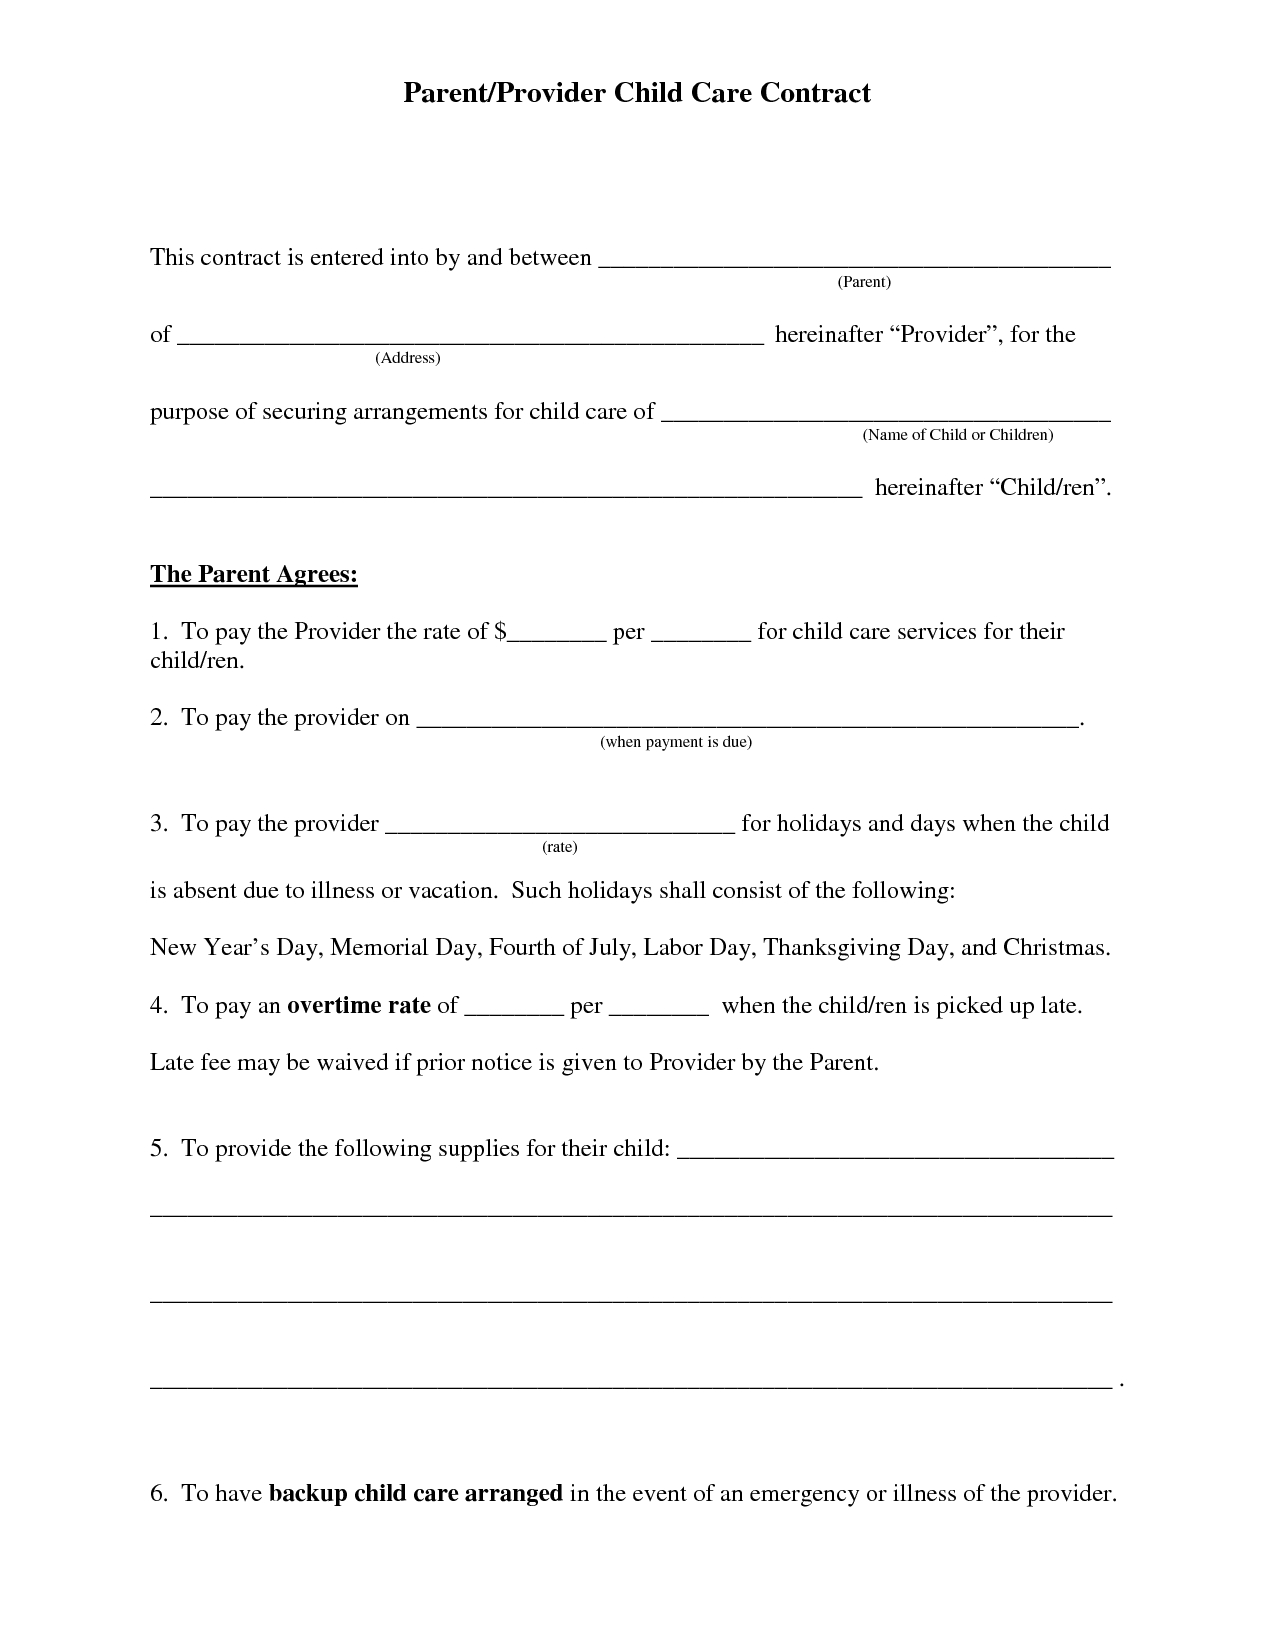 Free+Daycare+Contract+Forms | Printable Daycare Forms | Pinterest - Free Printable Daycare Forms For Parents